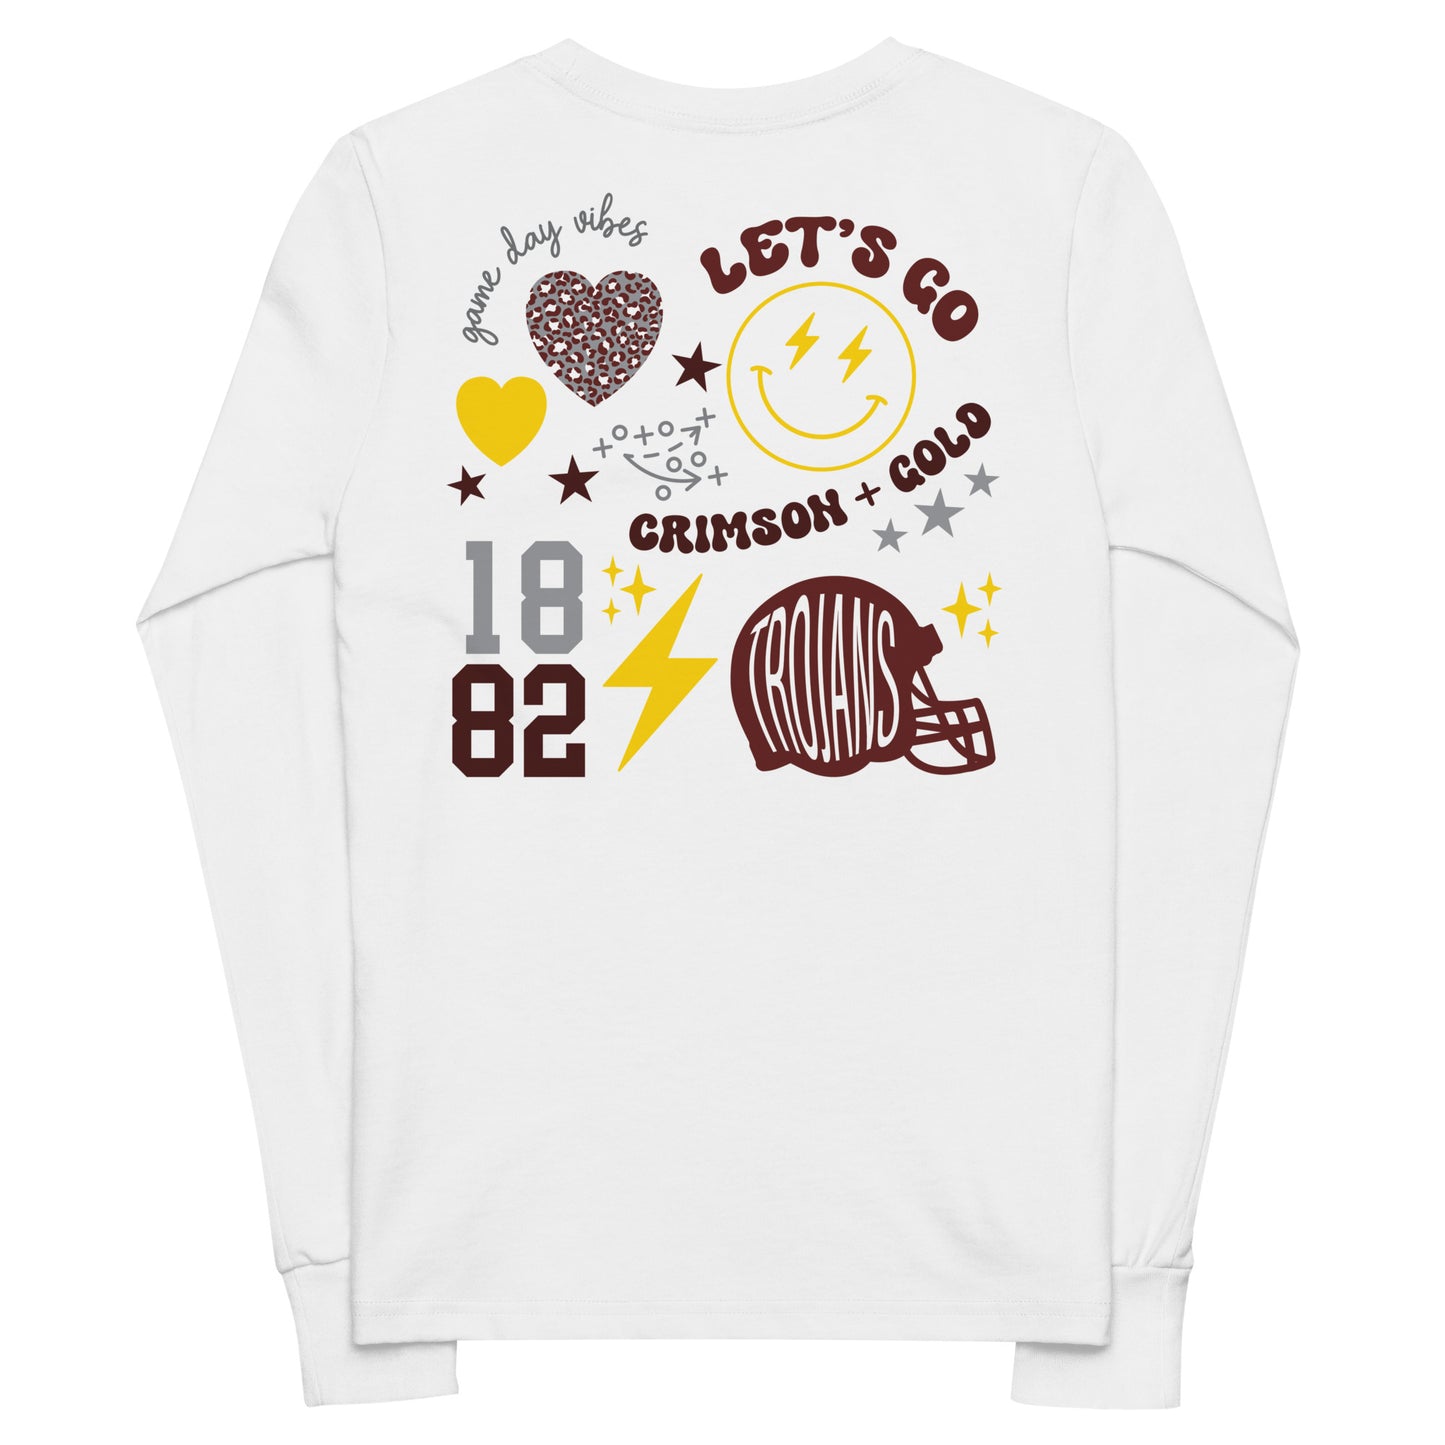 Trojans Game Day Youth Long Sleeve Tee